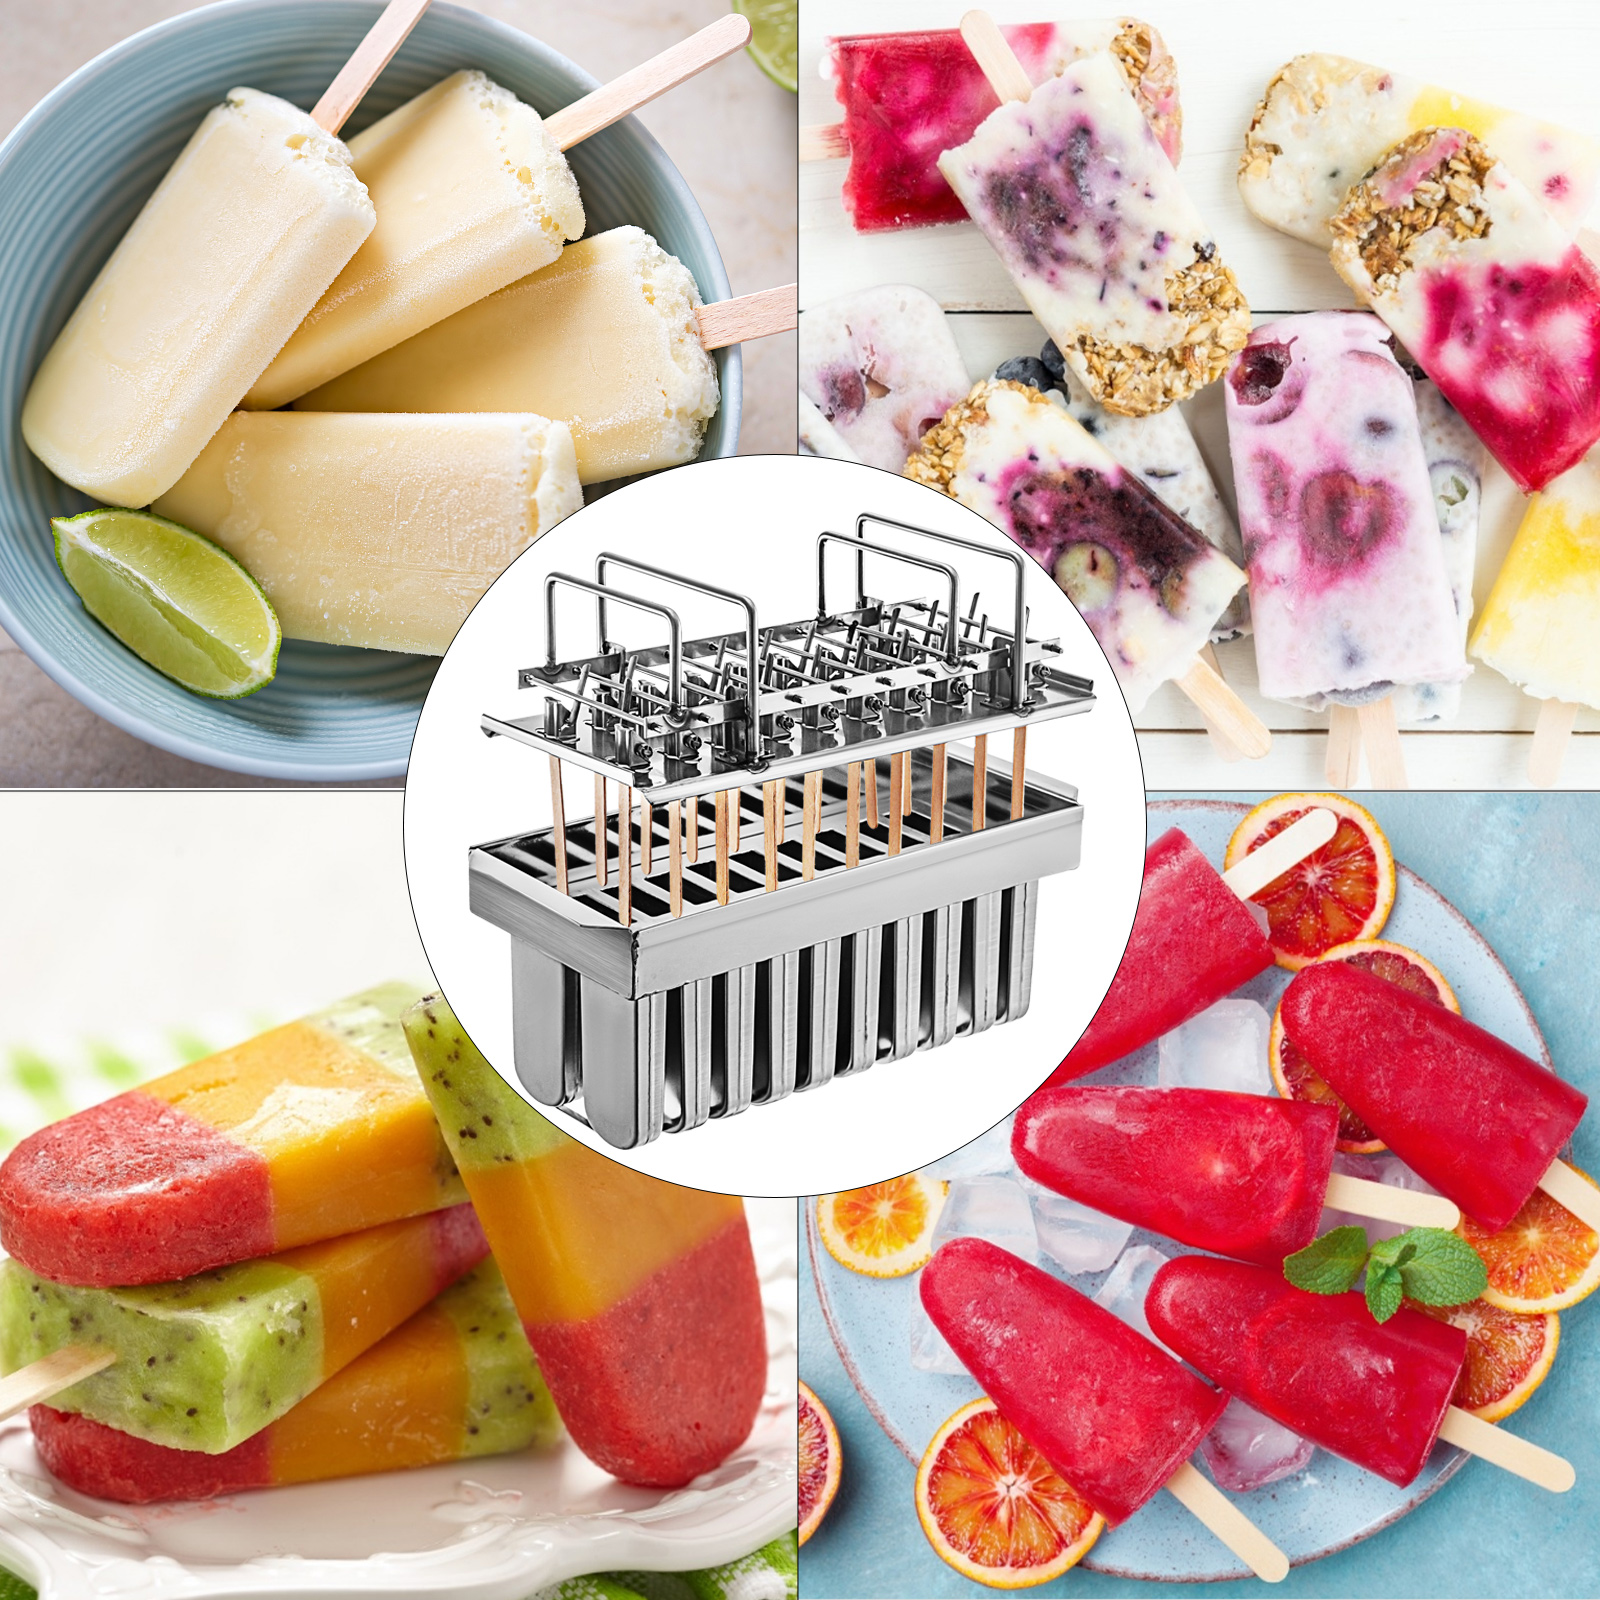 4×6 Manual Frozen Ice Cream Equipment Stainless Steel Popsicle Mold